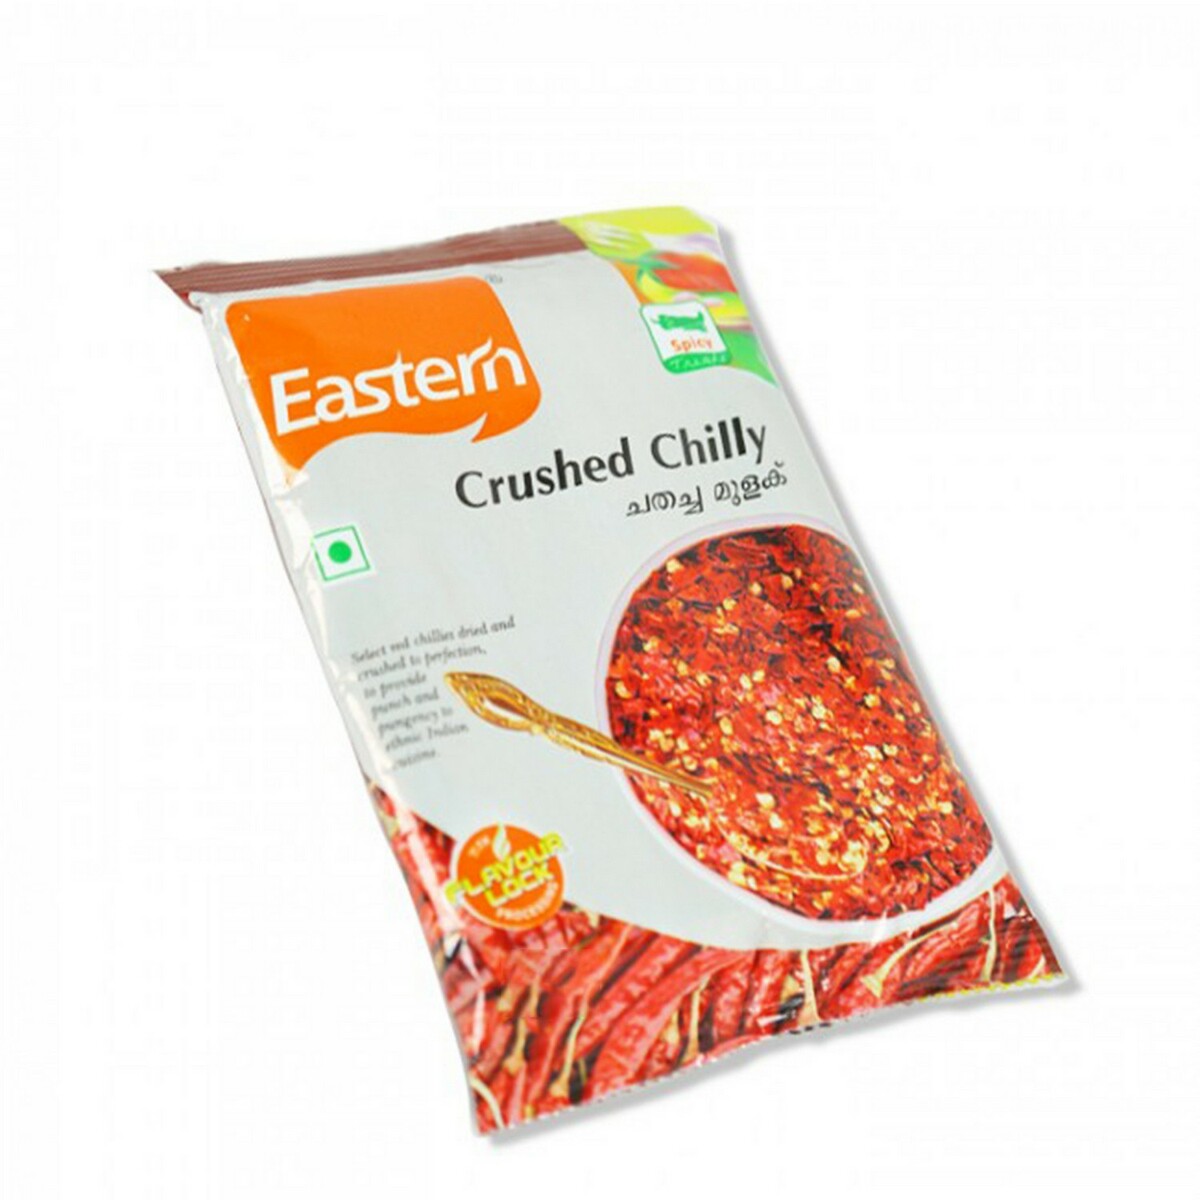 Eastern Crushed Chilly 100g